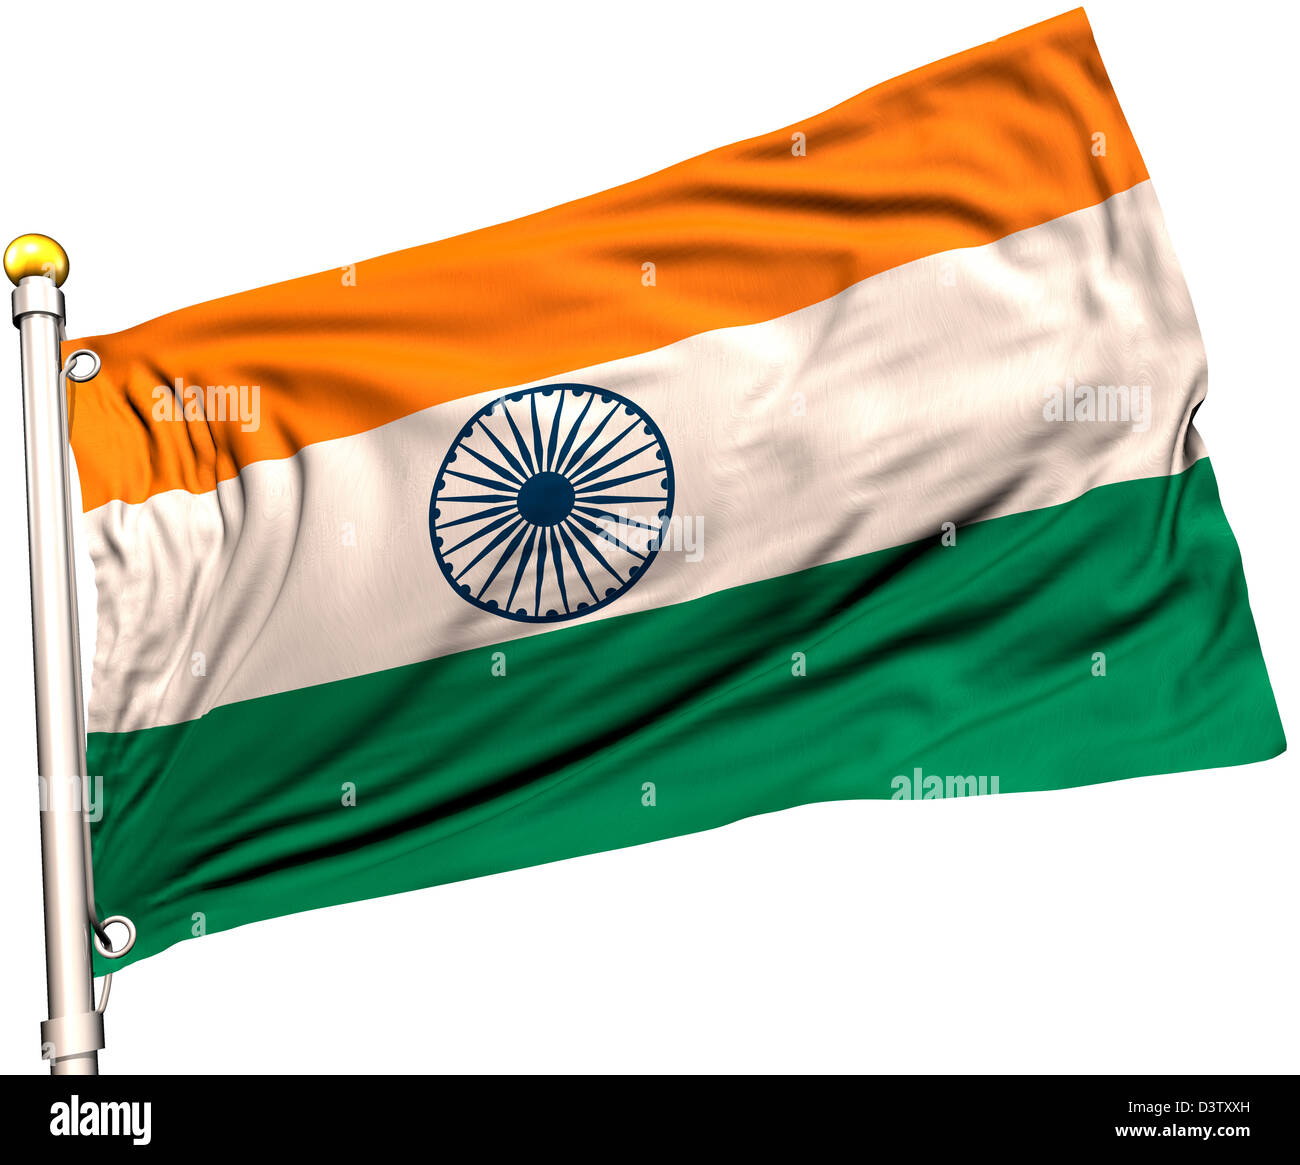 India flag on a flag pole. Clipping path included. Silk texture visible on the flag at 100%. Stock Photo